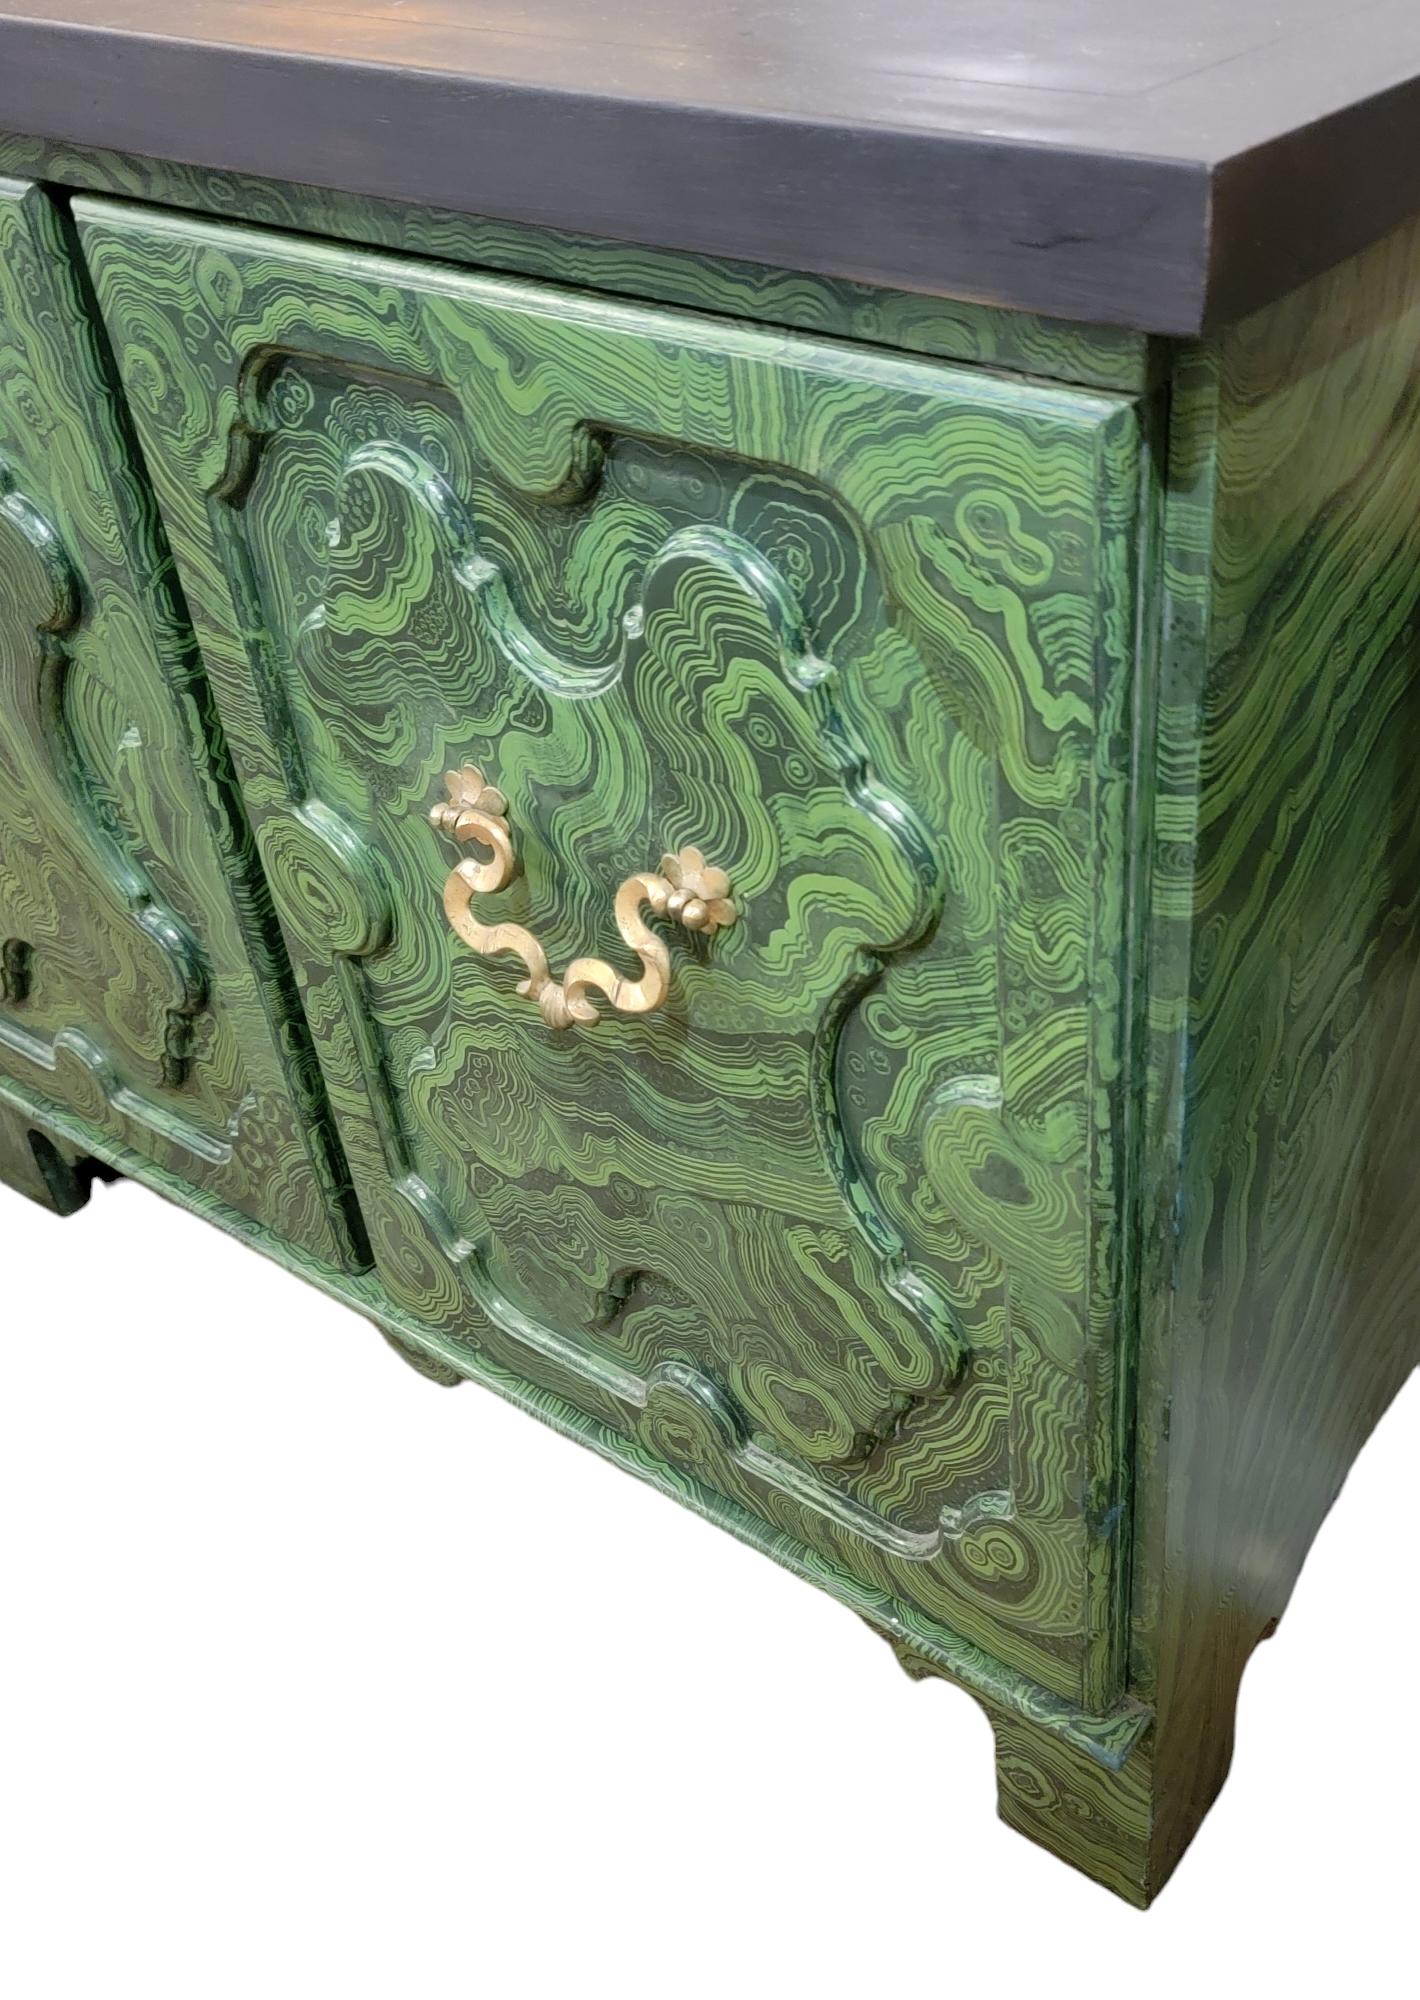 Hand Painted Baker 4 Door Credenza With Ornate Brass Handles by Tony Duquette 1